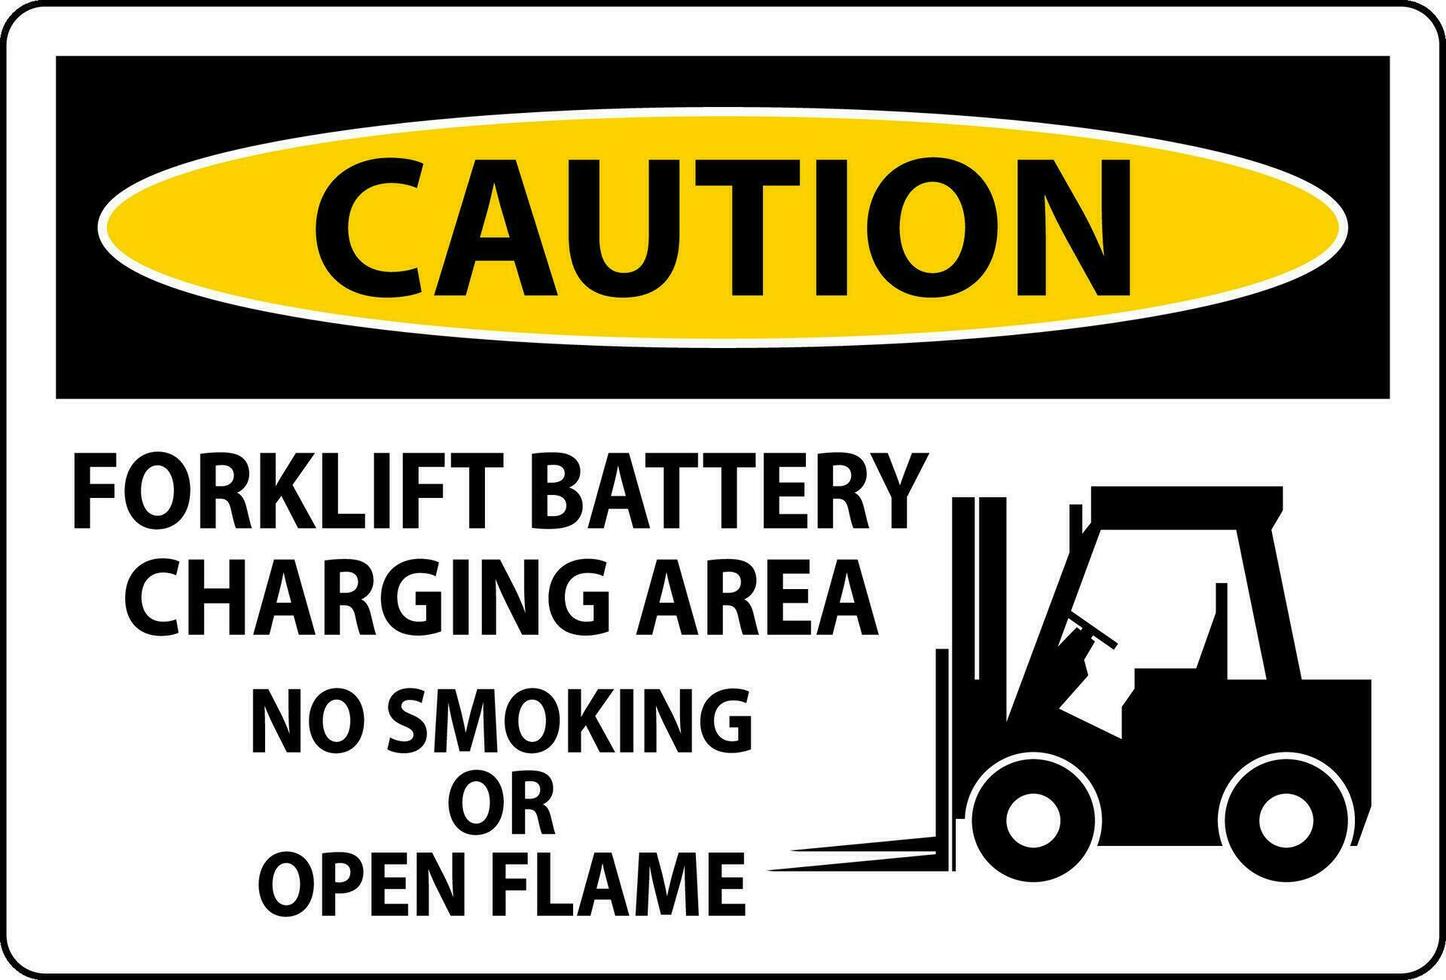 Caution Sign Forklift Battery Charging Area, No Smoking Or Open Flame vector